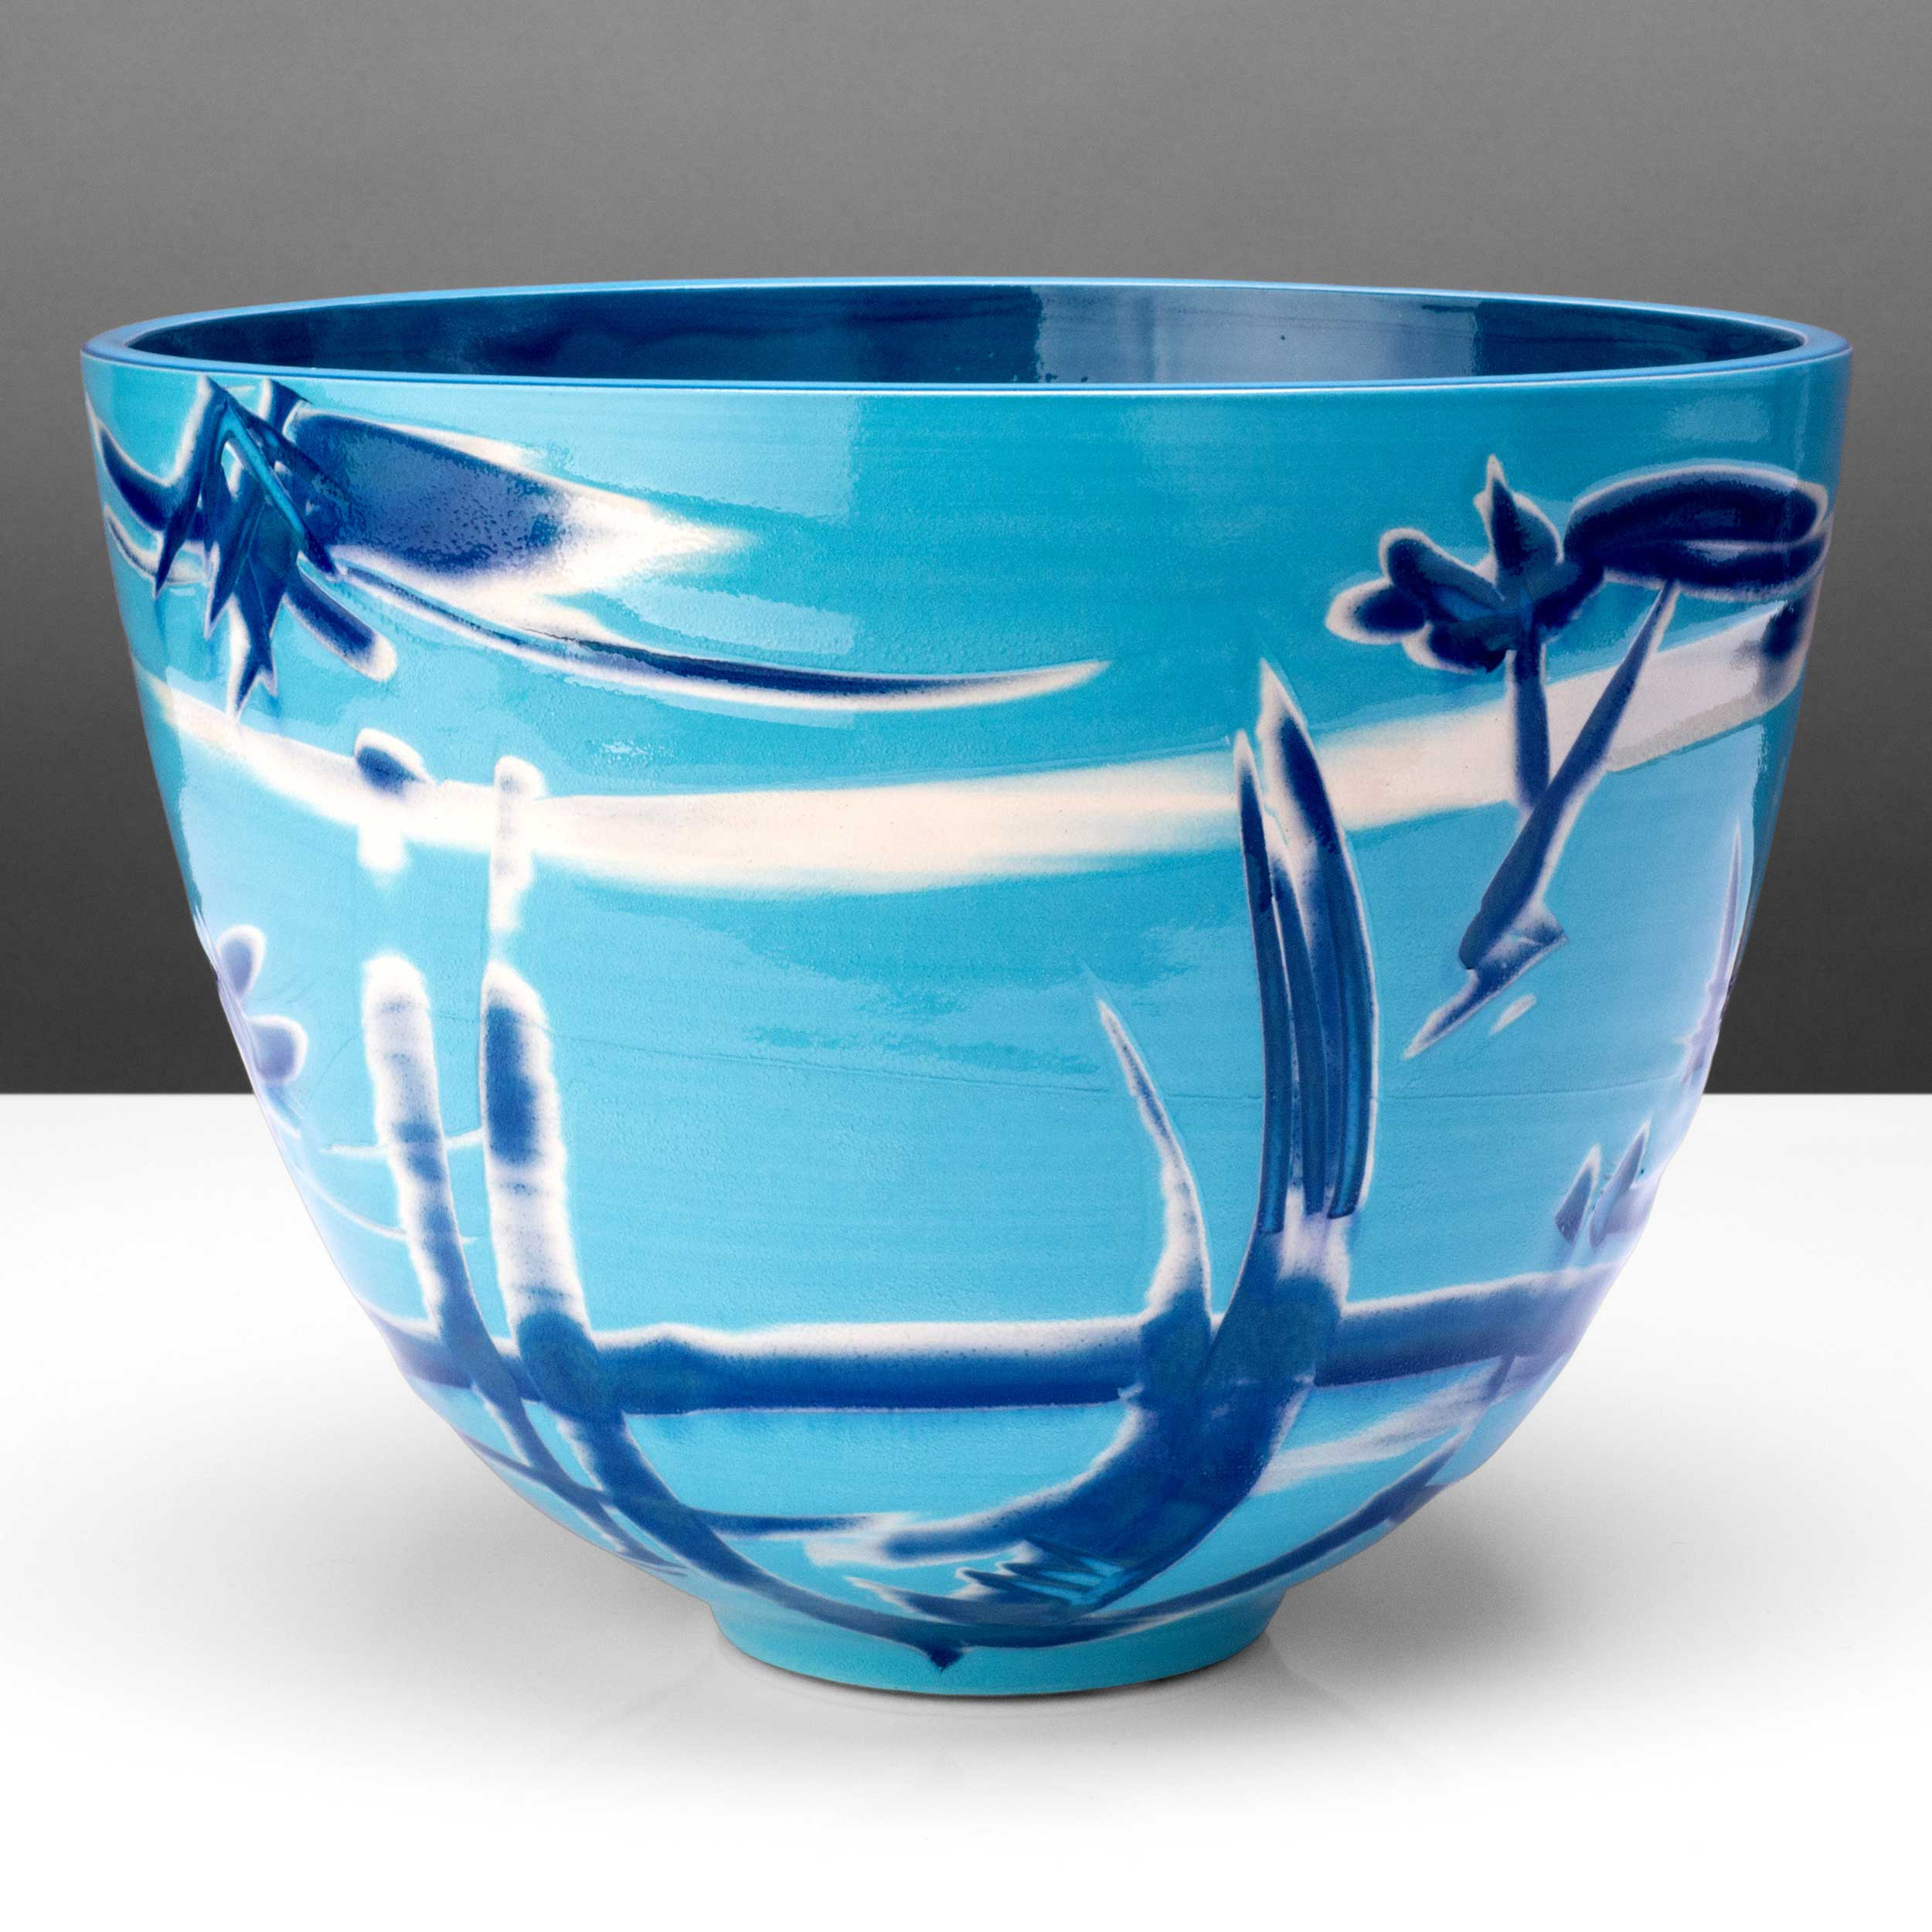 Blue Turquoise Deep Ceramic Bowl by Rowena Gilbert